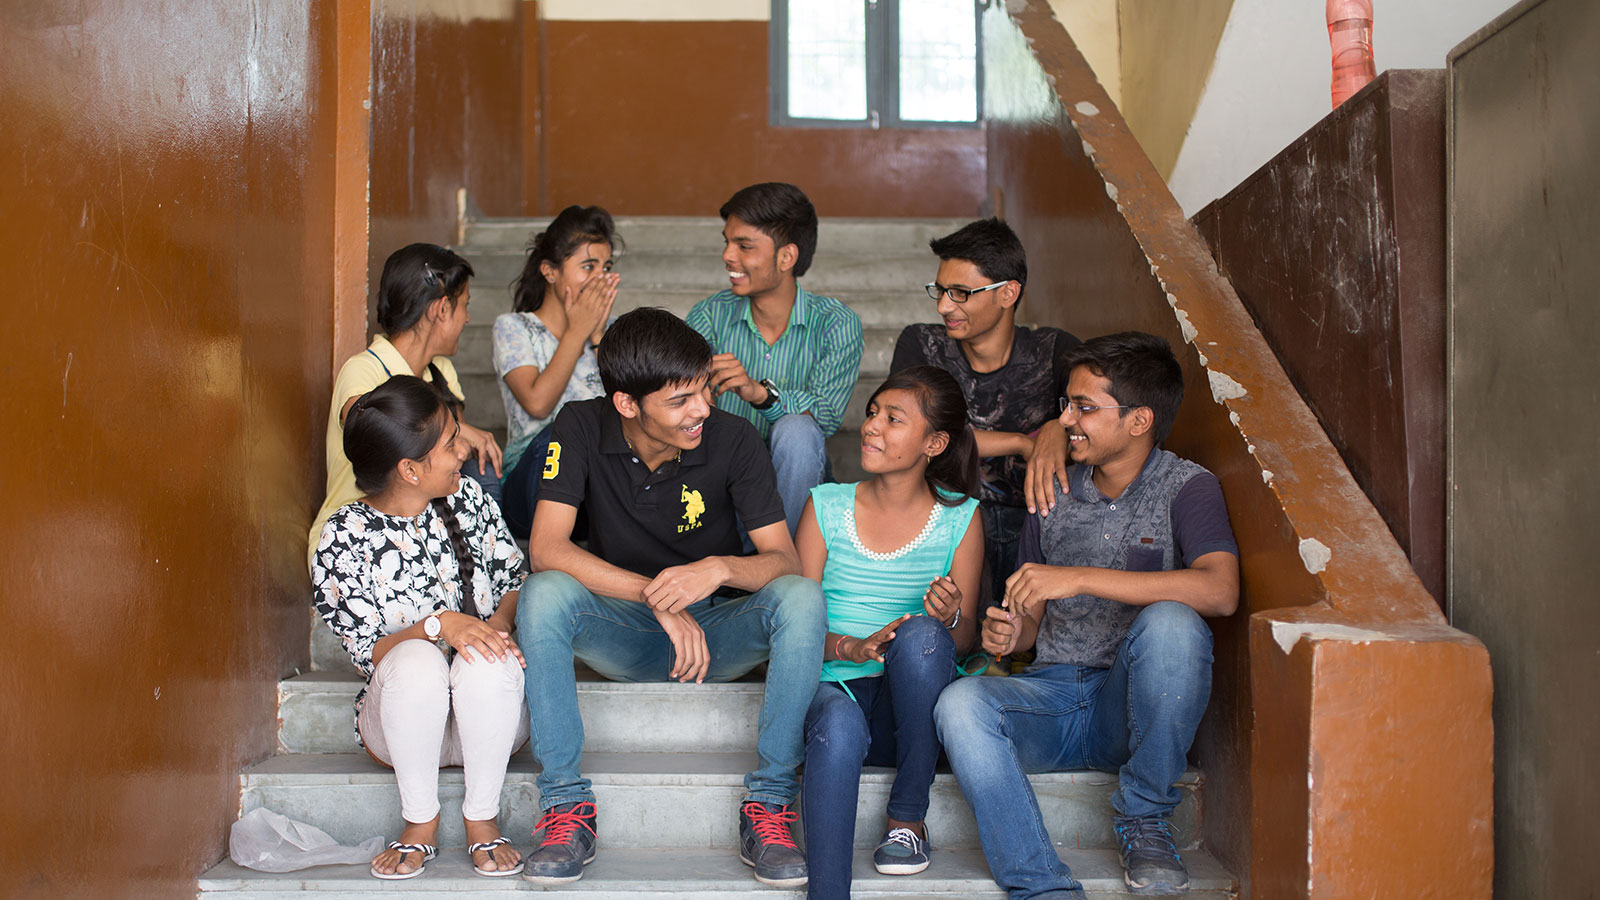 Indian students at school benefit from impact investing